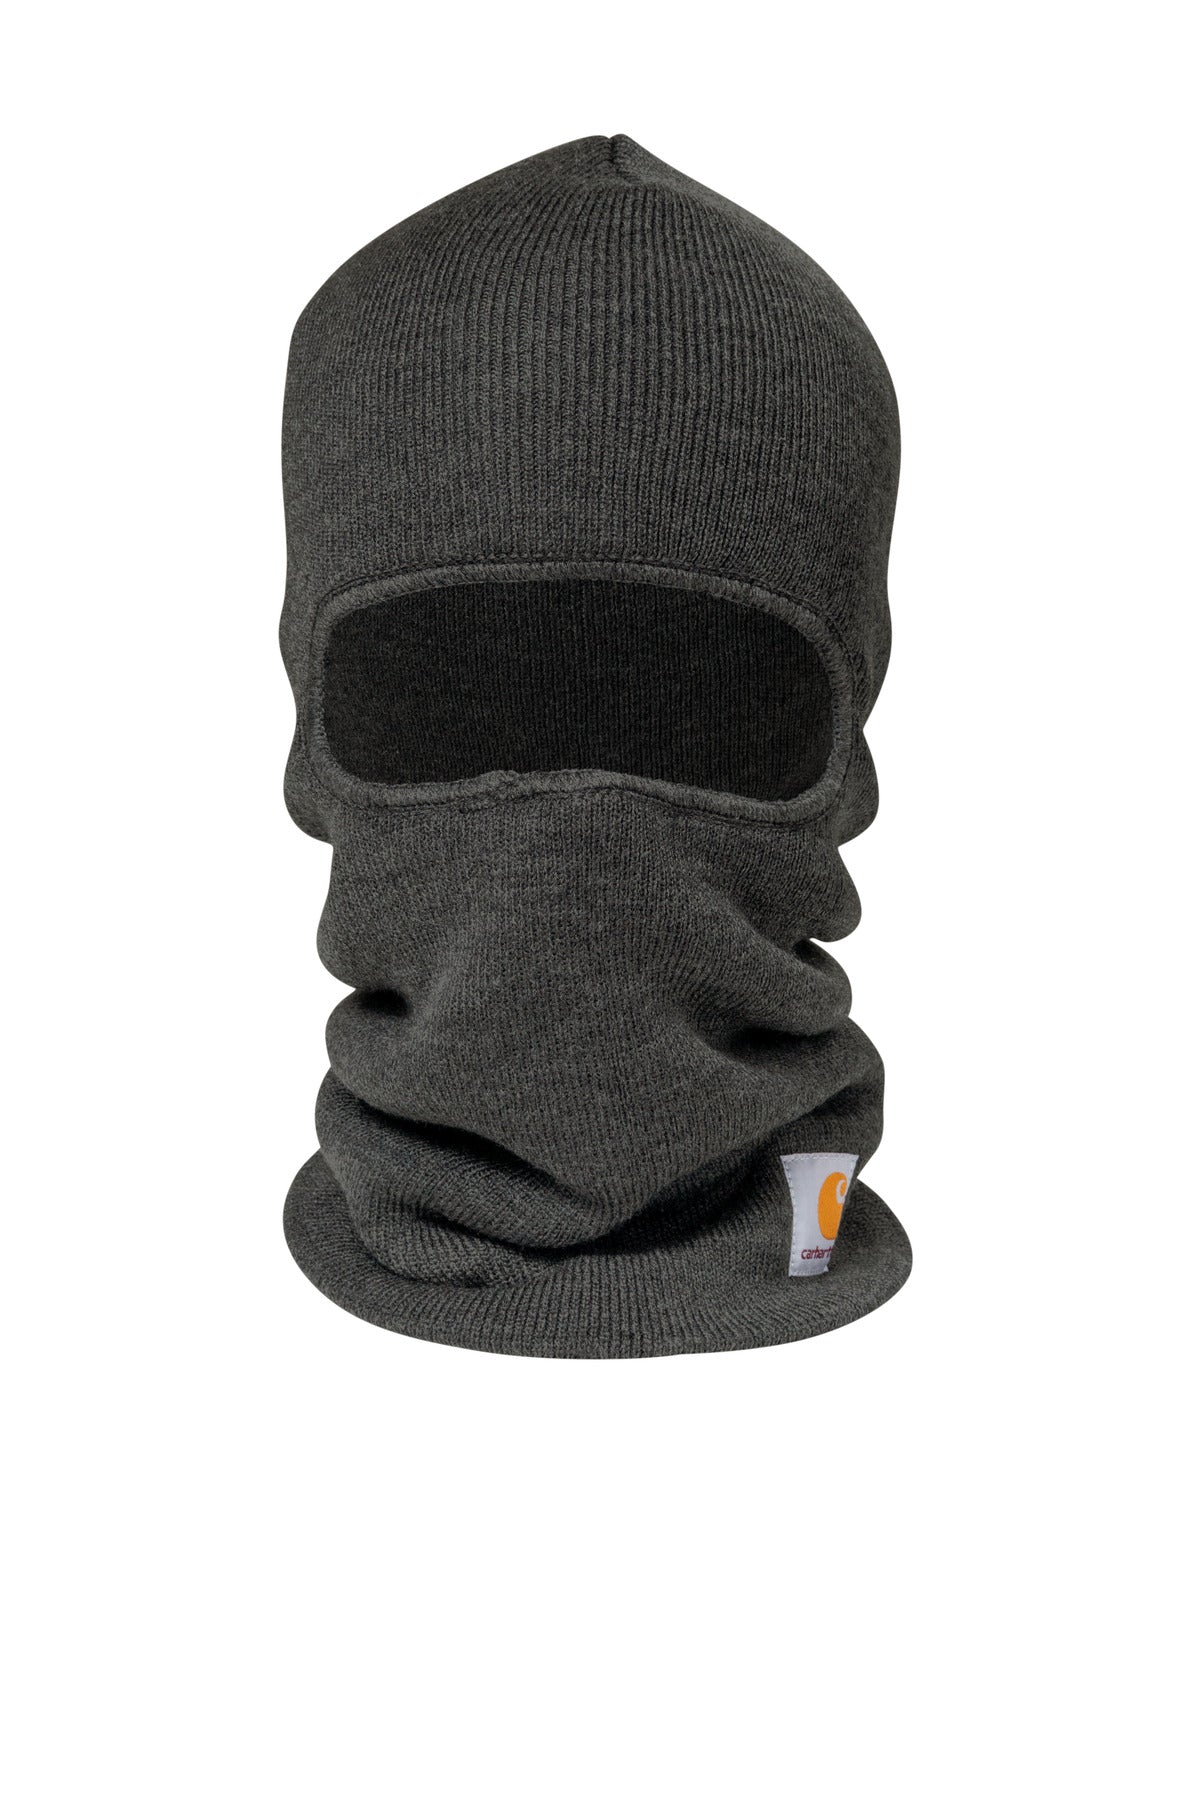 Carhartt® Knit Insulated Face Mask CT104485 - DFW Impression